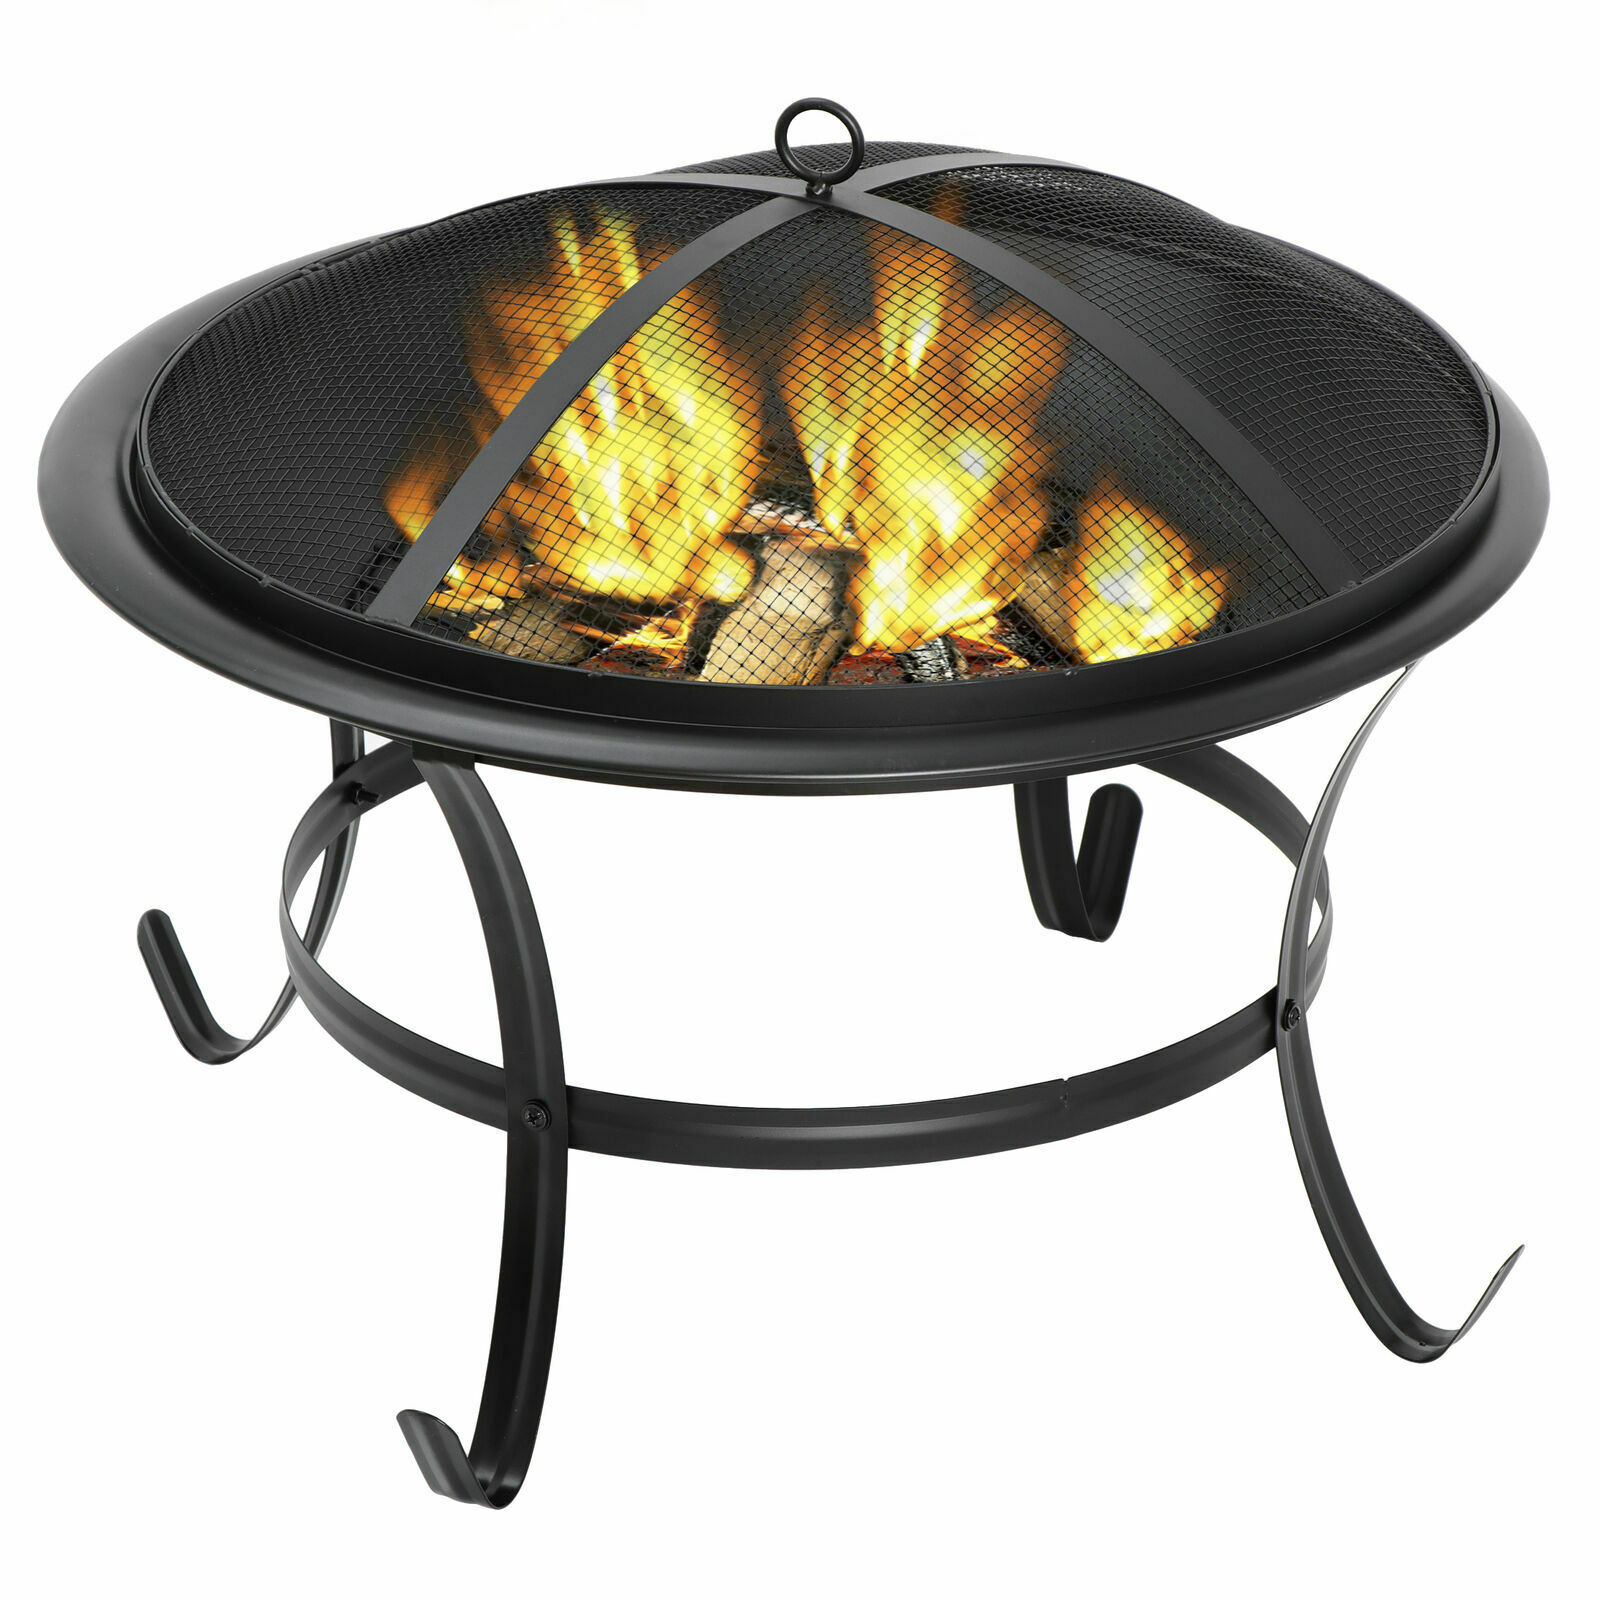 22" Fire Pit Heater Backyard Wood Burning Patio Deck Stove Fireplace Table